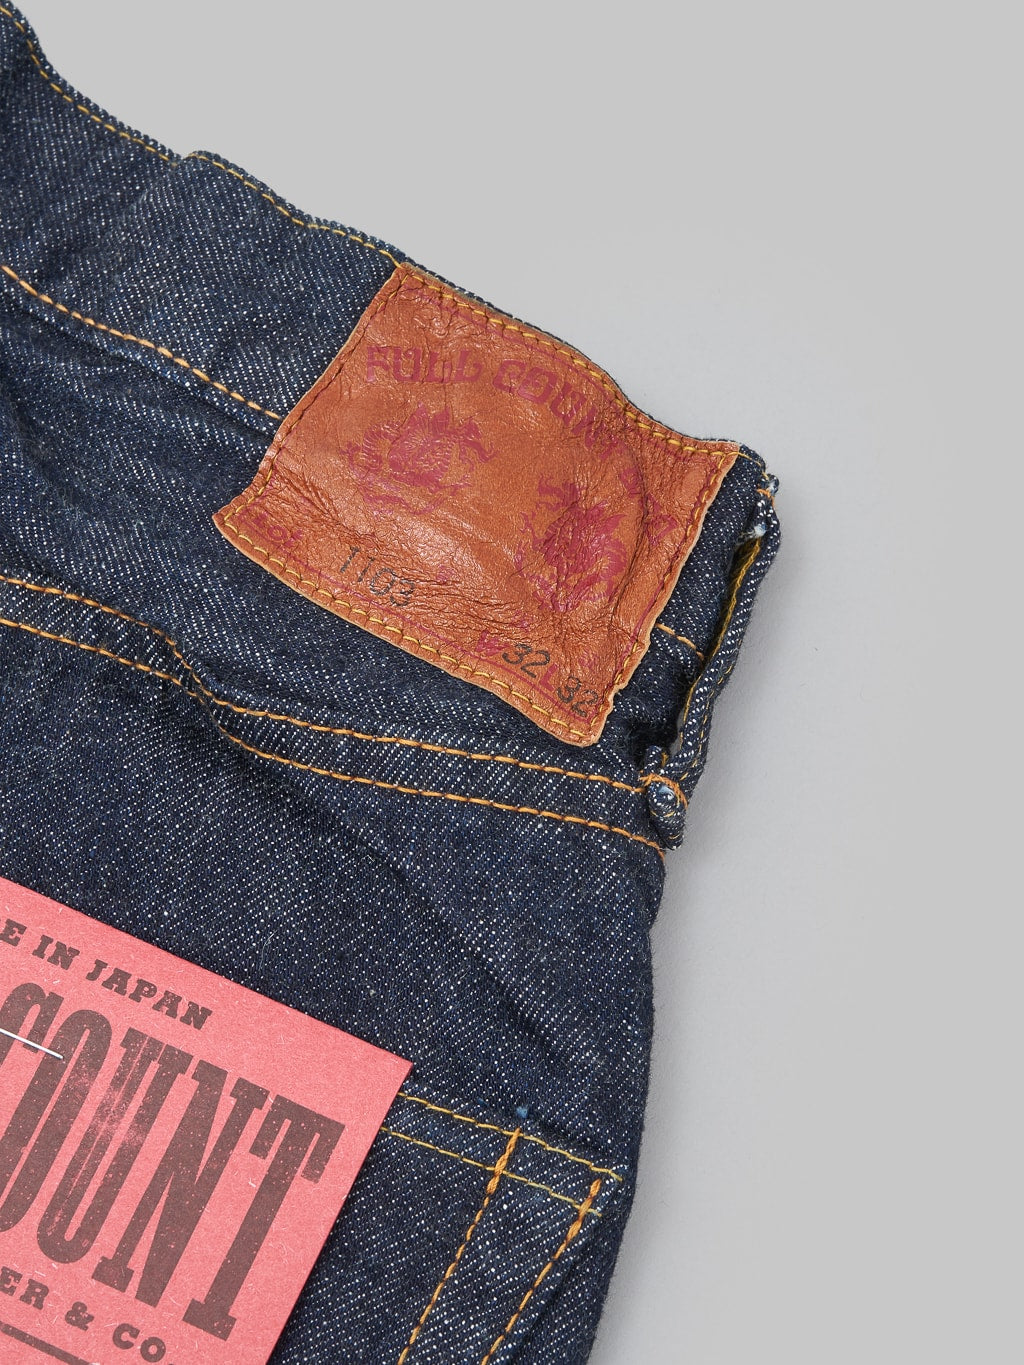 fullcount 1103 clean straight selvedge denim jeans leather patch